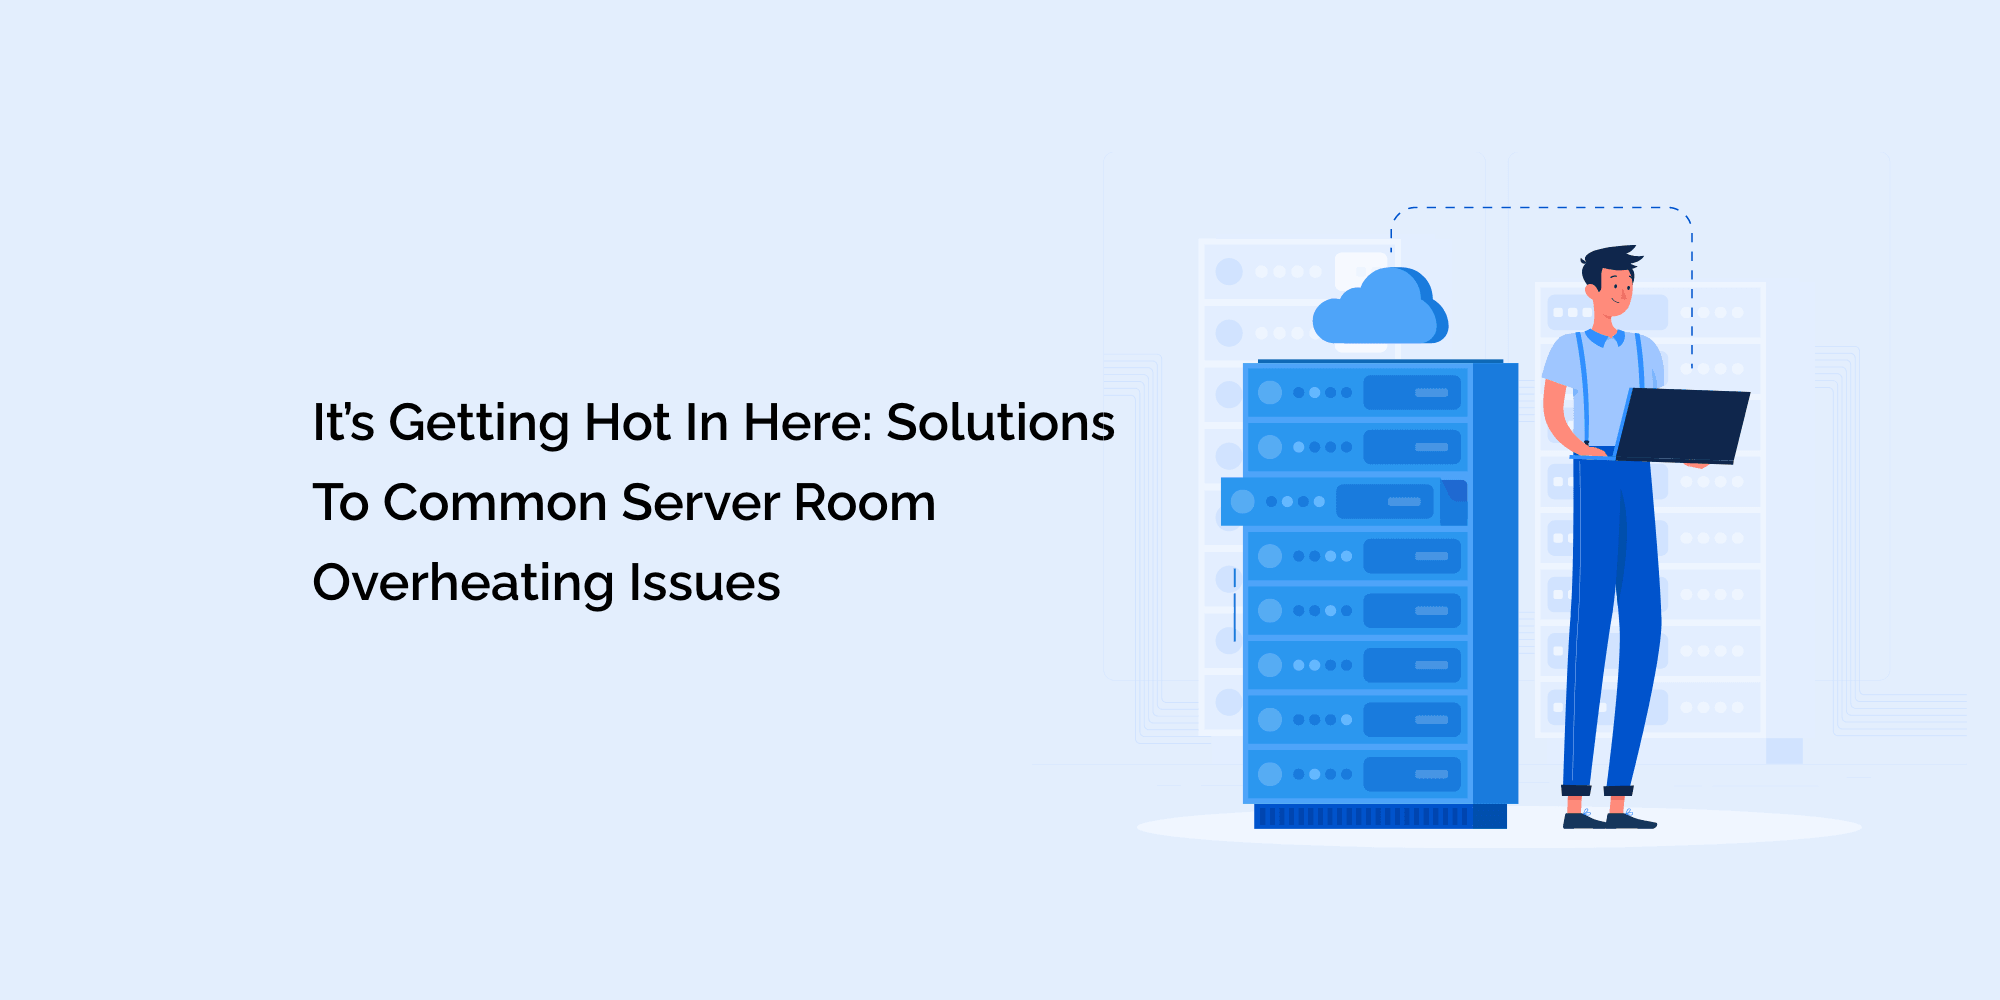 It's Getting Hot in Here: Solutions to Common Server Room Overheating Issues